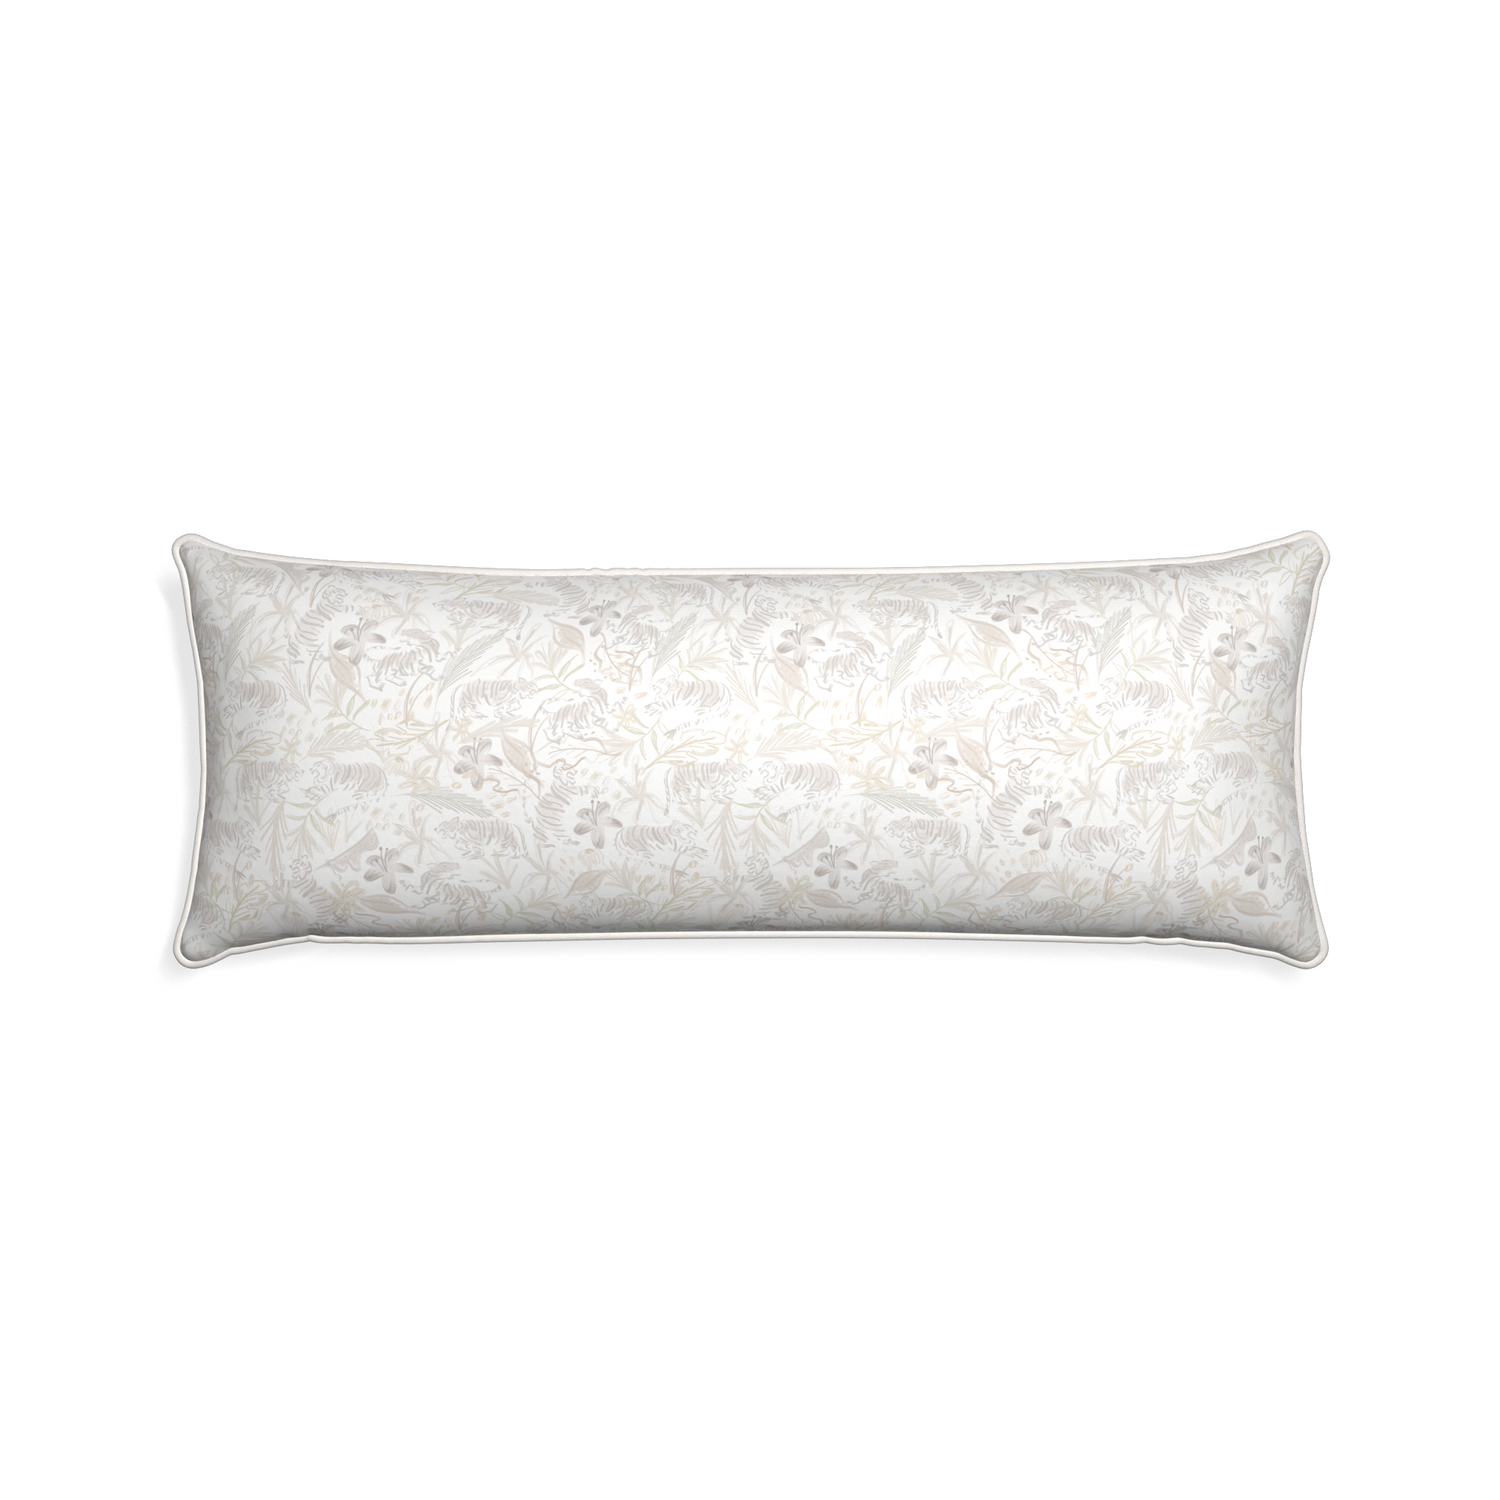 Xl-lumbar frida sand custom pillow with snow piping on white background